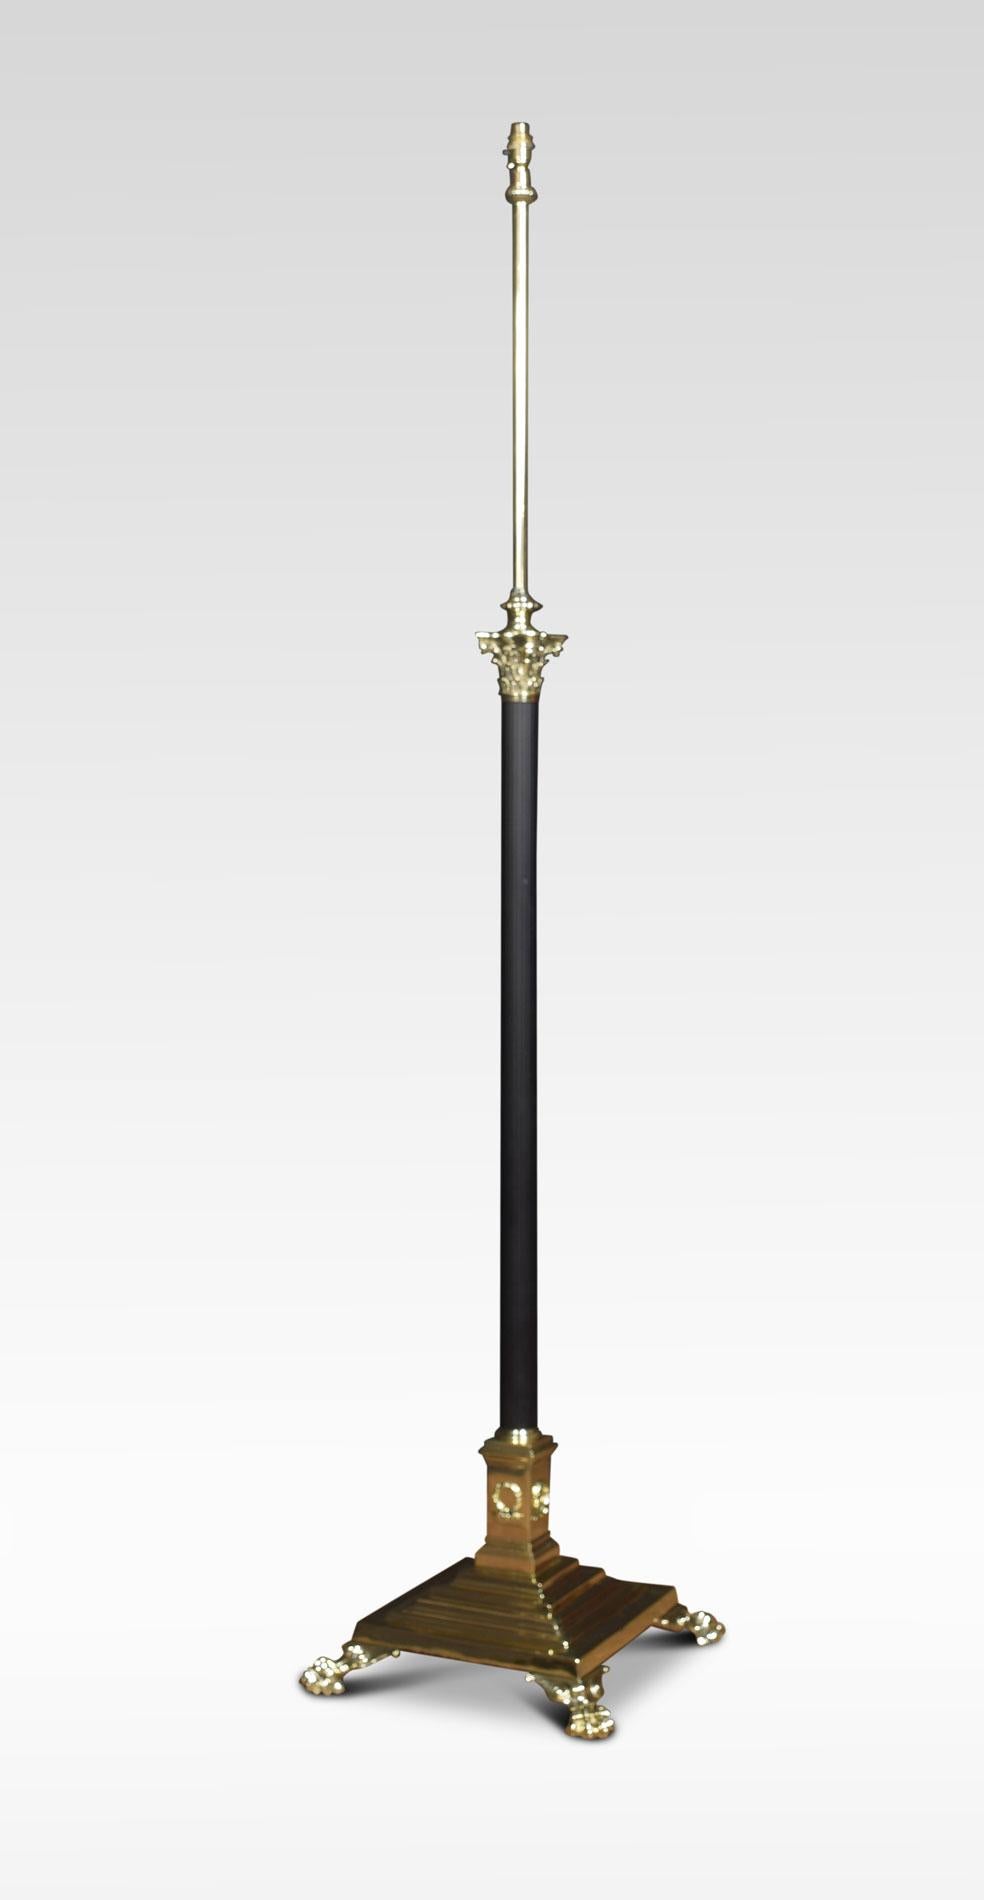 19th century brass standard lamp. Having ebonised Corinthian column and adjustable stem, on large stepped square base with paw feet. The lamp has been rewired.
Dimensions:
Height 54 inches adjustable to 72 inches
Length 15.5 inches
width 15.5